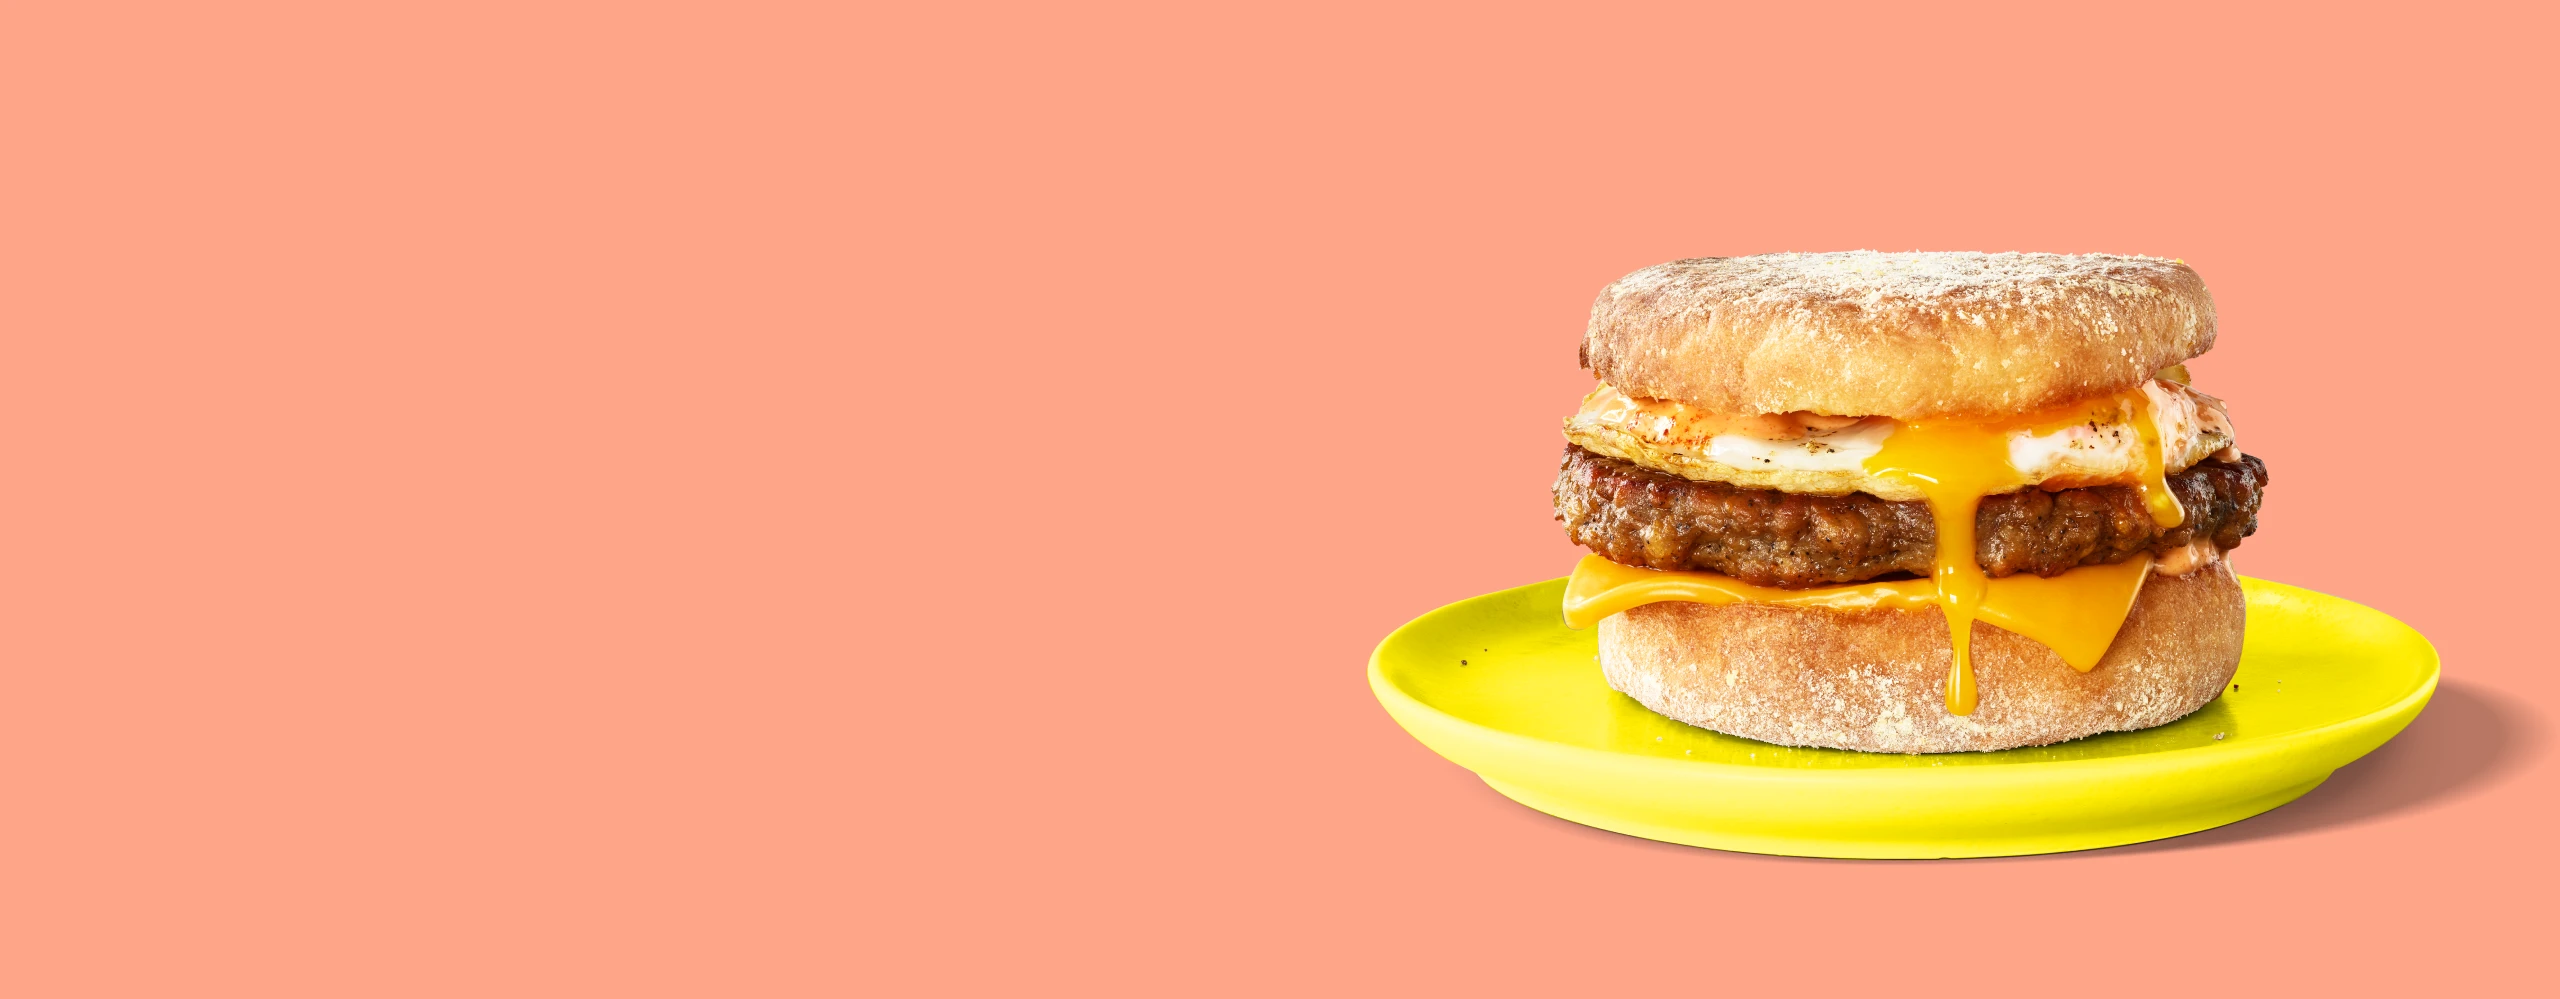 Impossible sausage breakfast sandwich with melty cheese and egg on a plate on a pink background